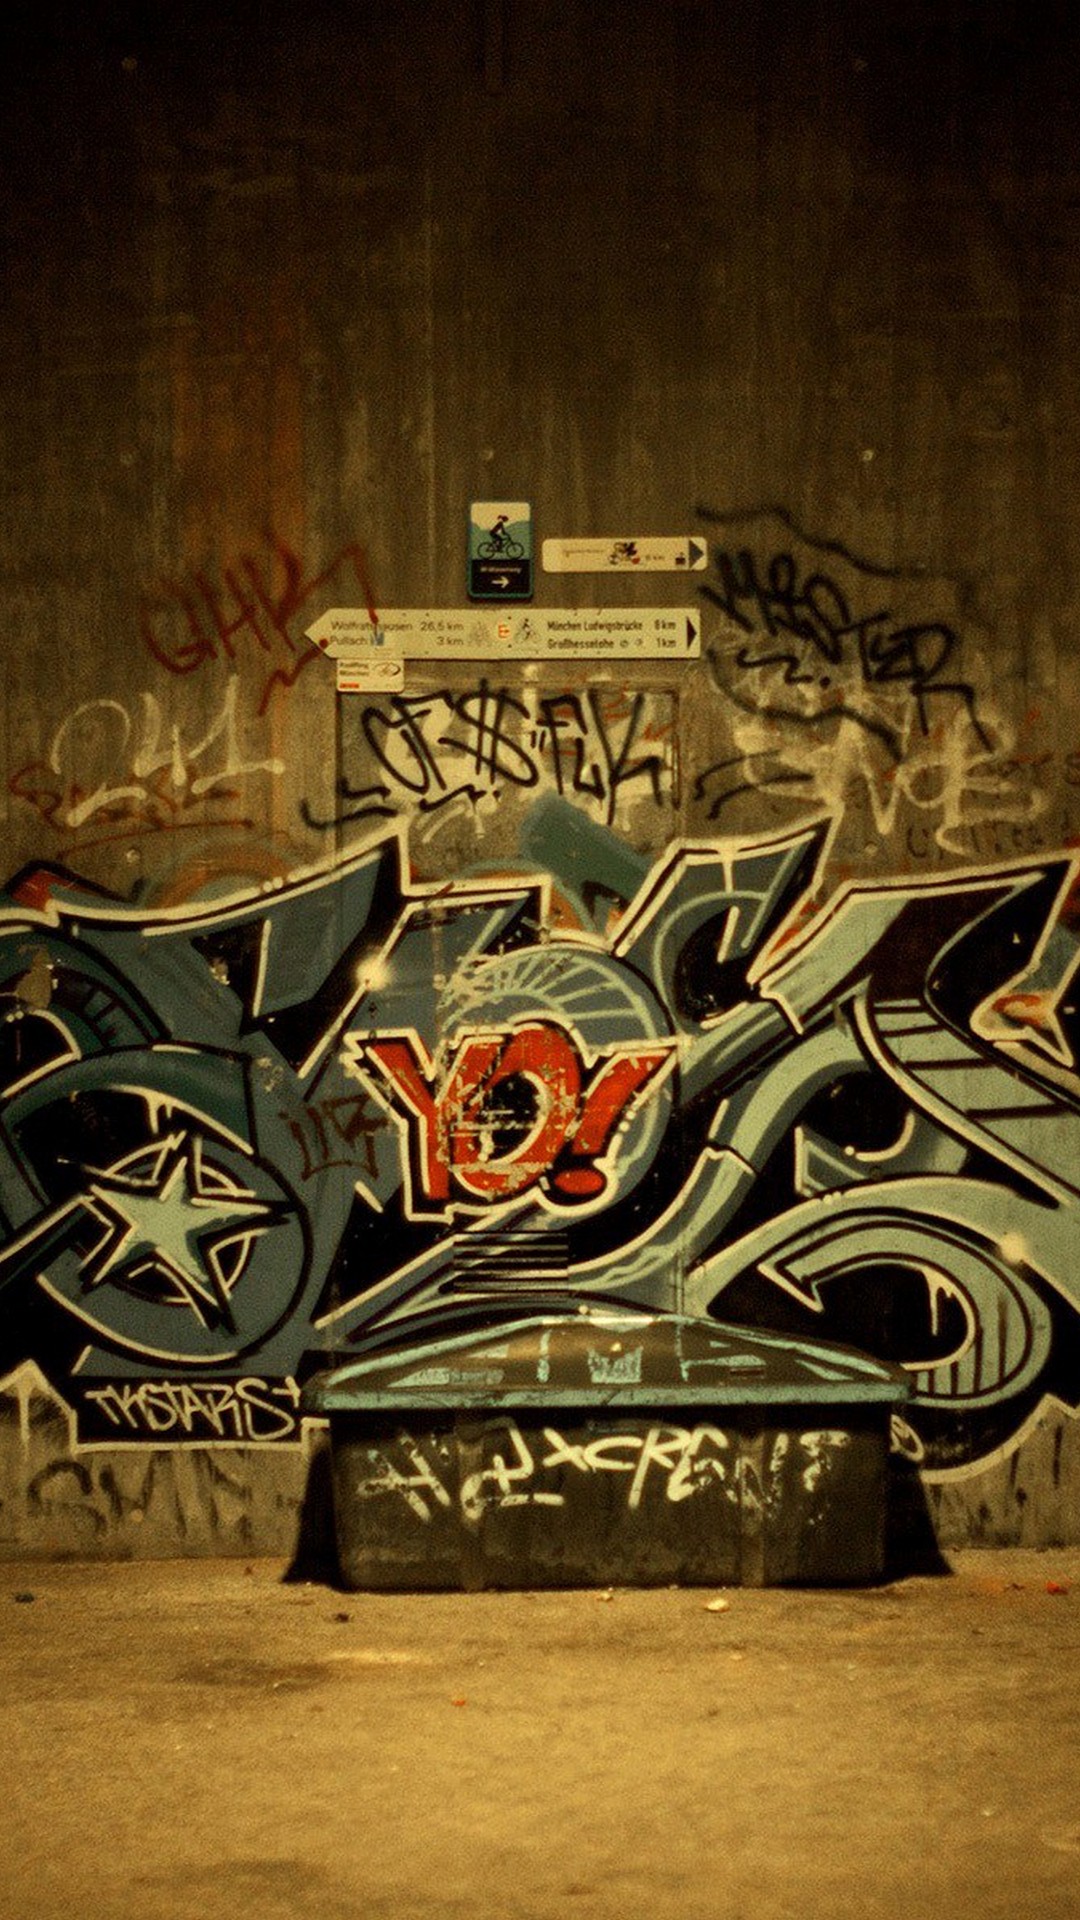 Graffiti Font Wallpaper For iPhone with resolution 1080X1920 pixel. You can make this wallpaper for your iPhone 5, 6, 7, 8, X backgrounds, Mobile Screensaver, or iPad Lock Screen